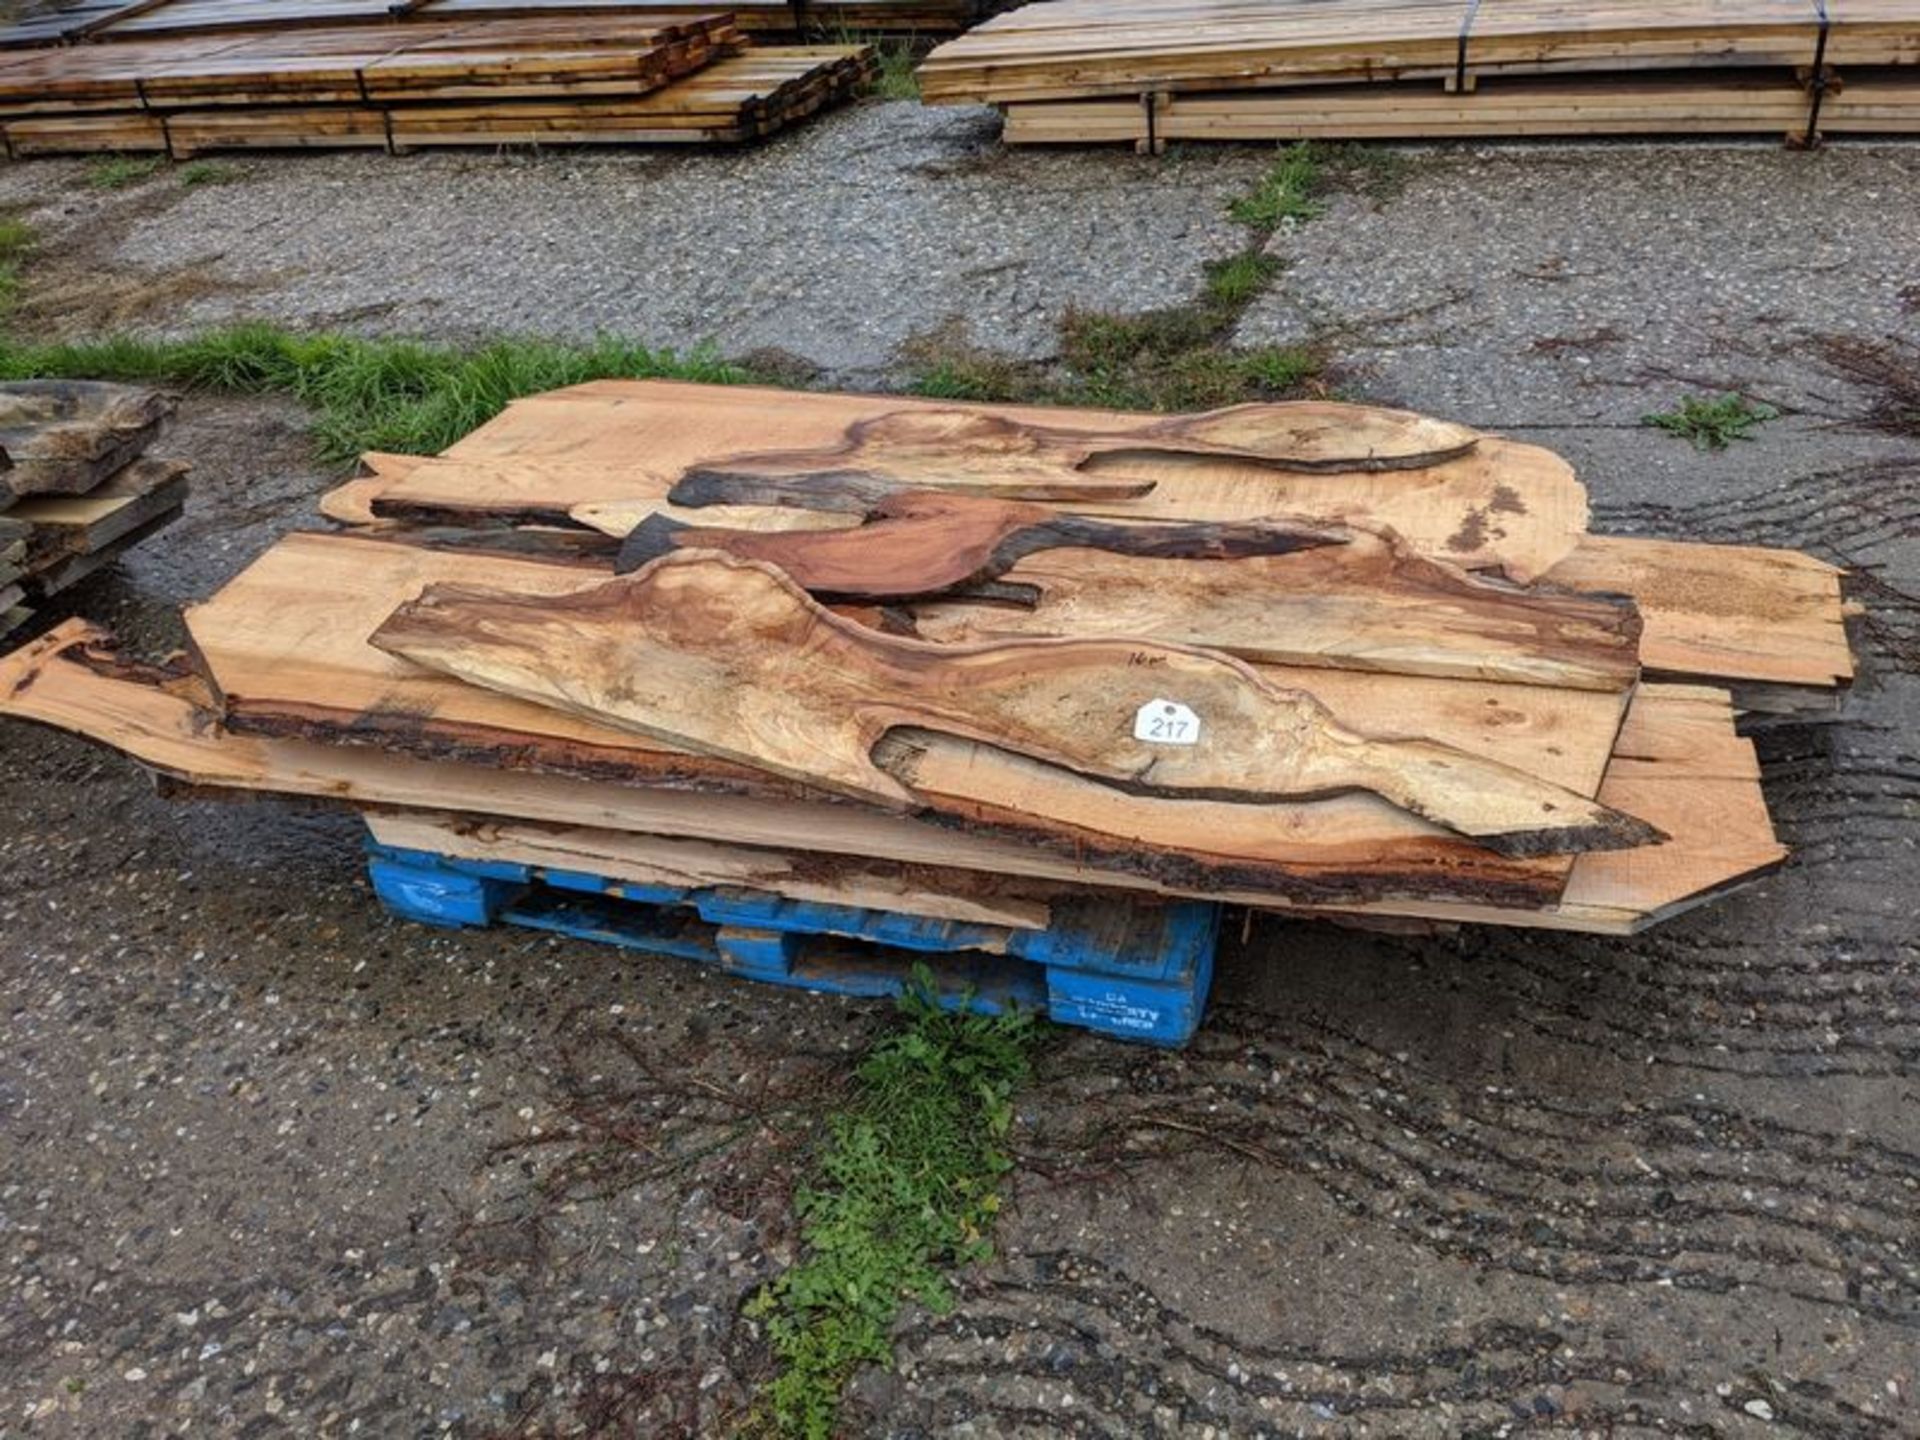 16 Pieces of 2" Thich Live Edge Wood, Varying Sizes